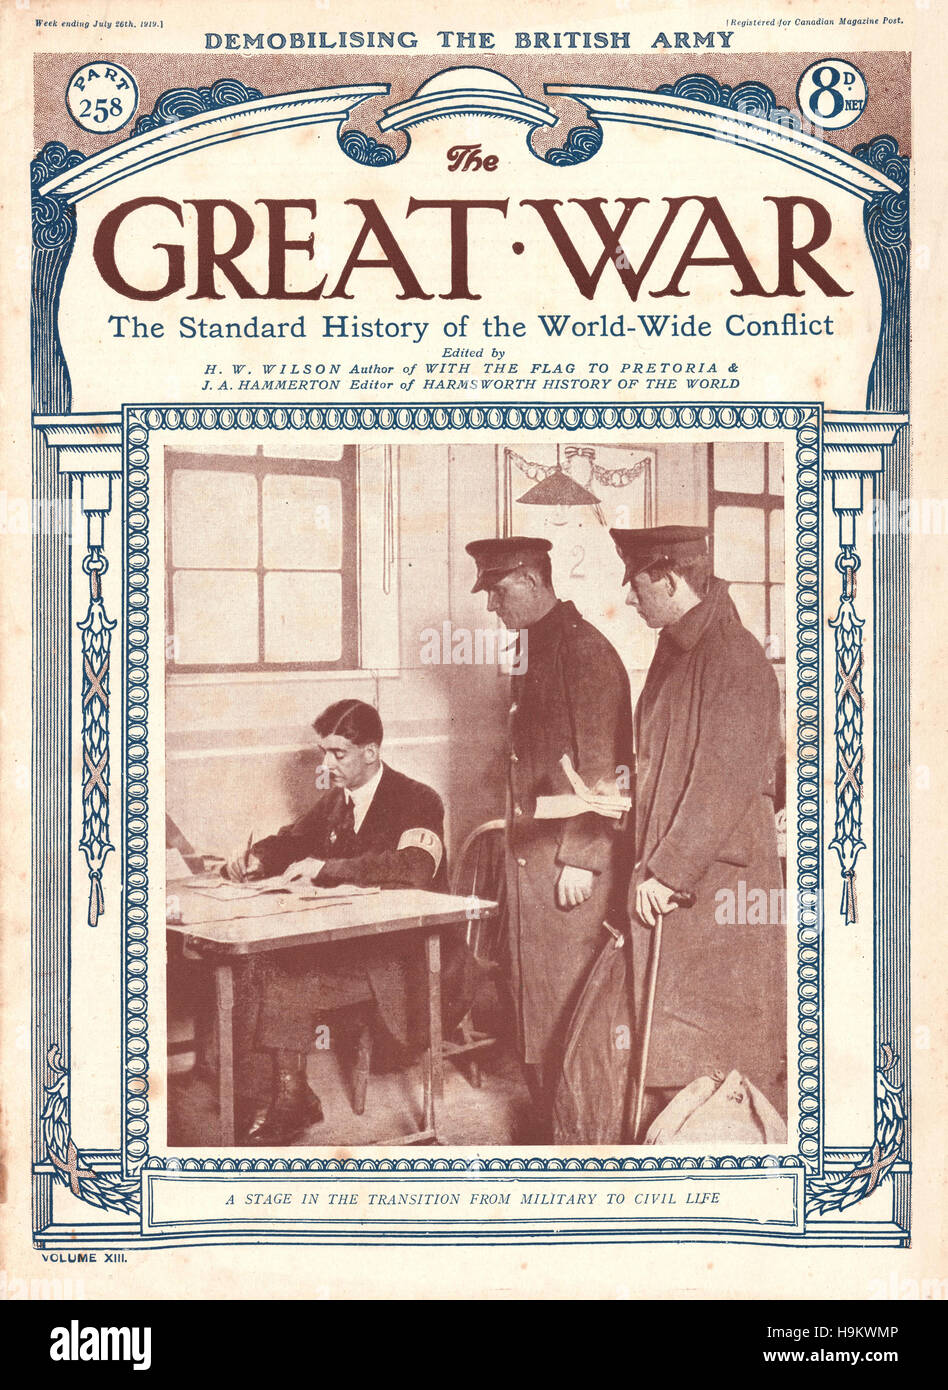 1919 The Great War front page Demobalisation of armed forces Stock Photo